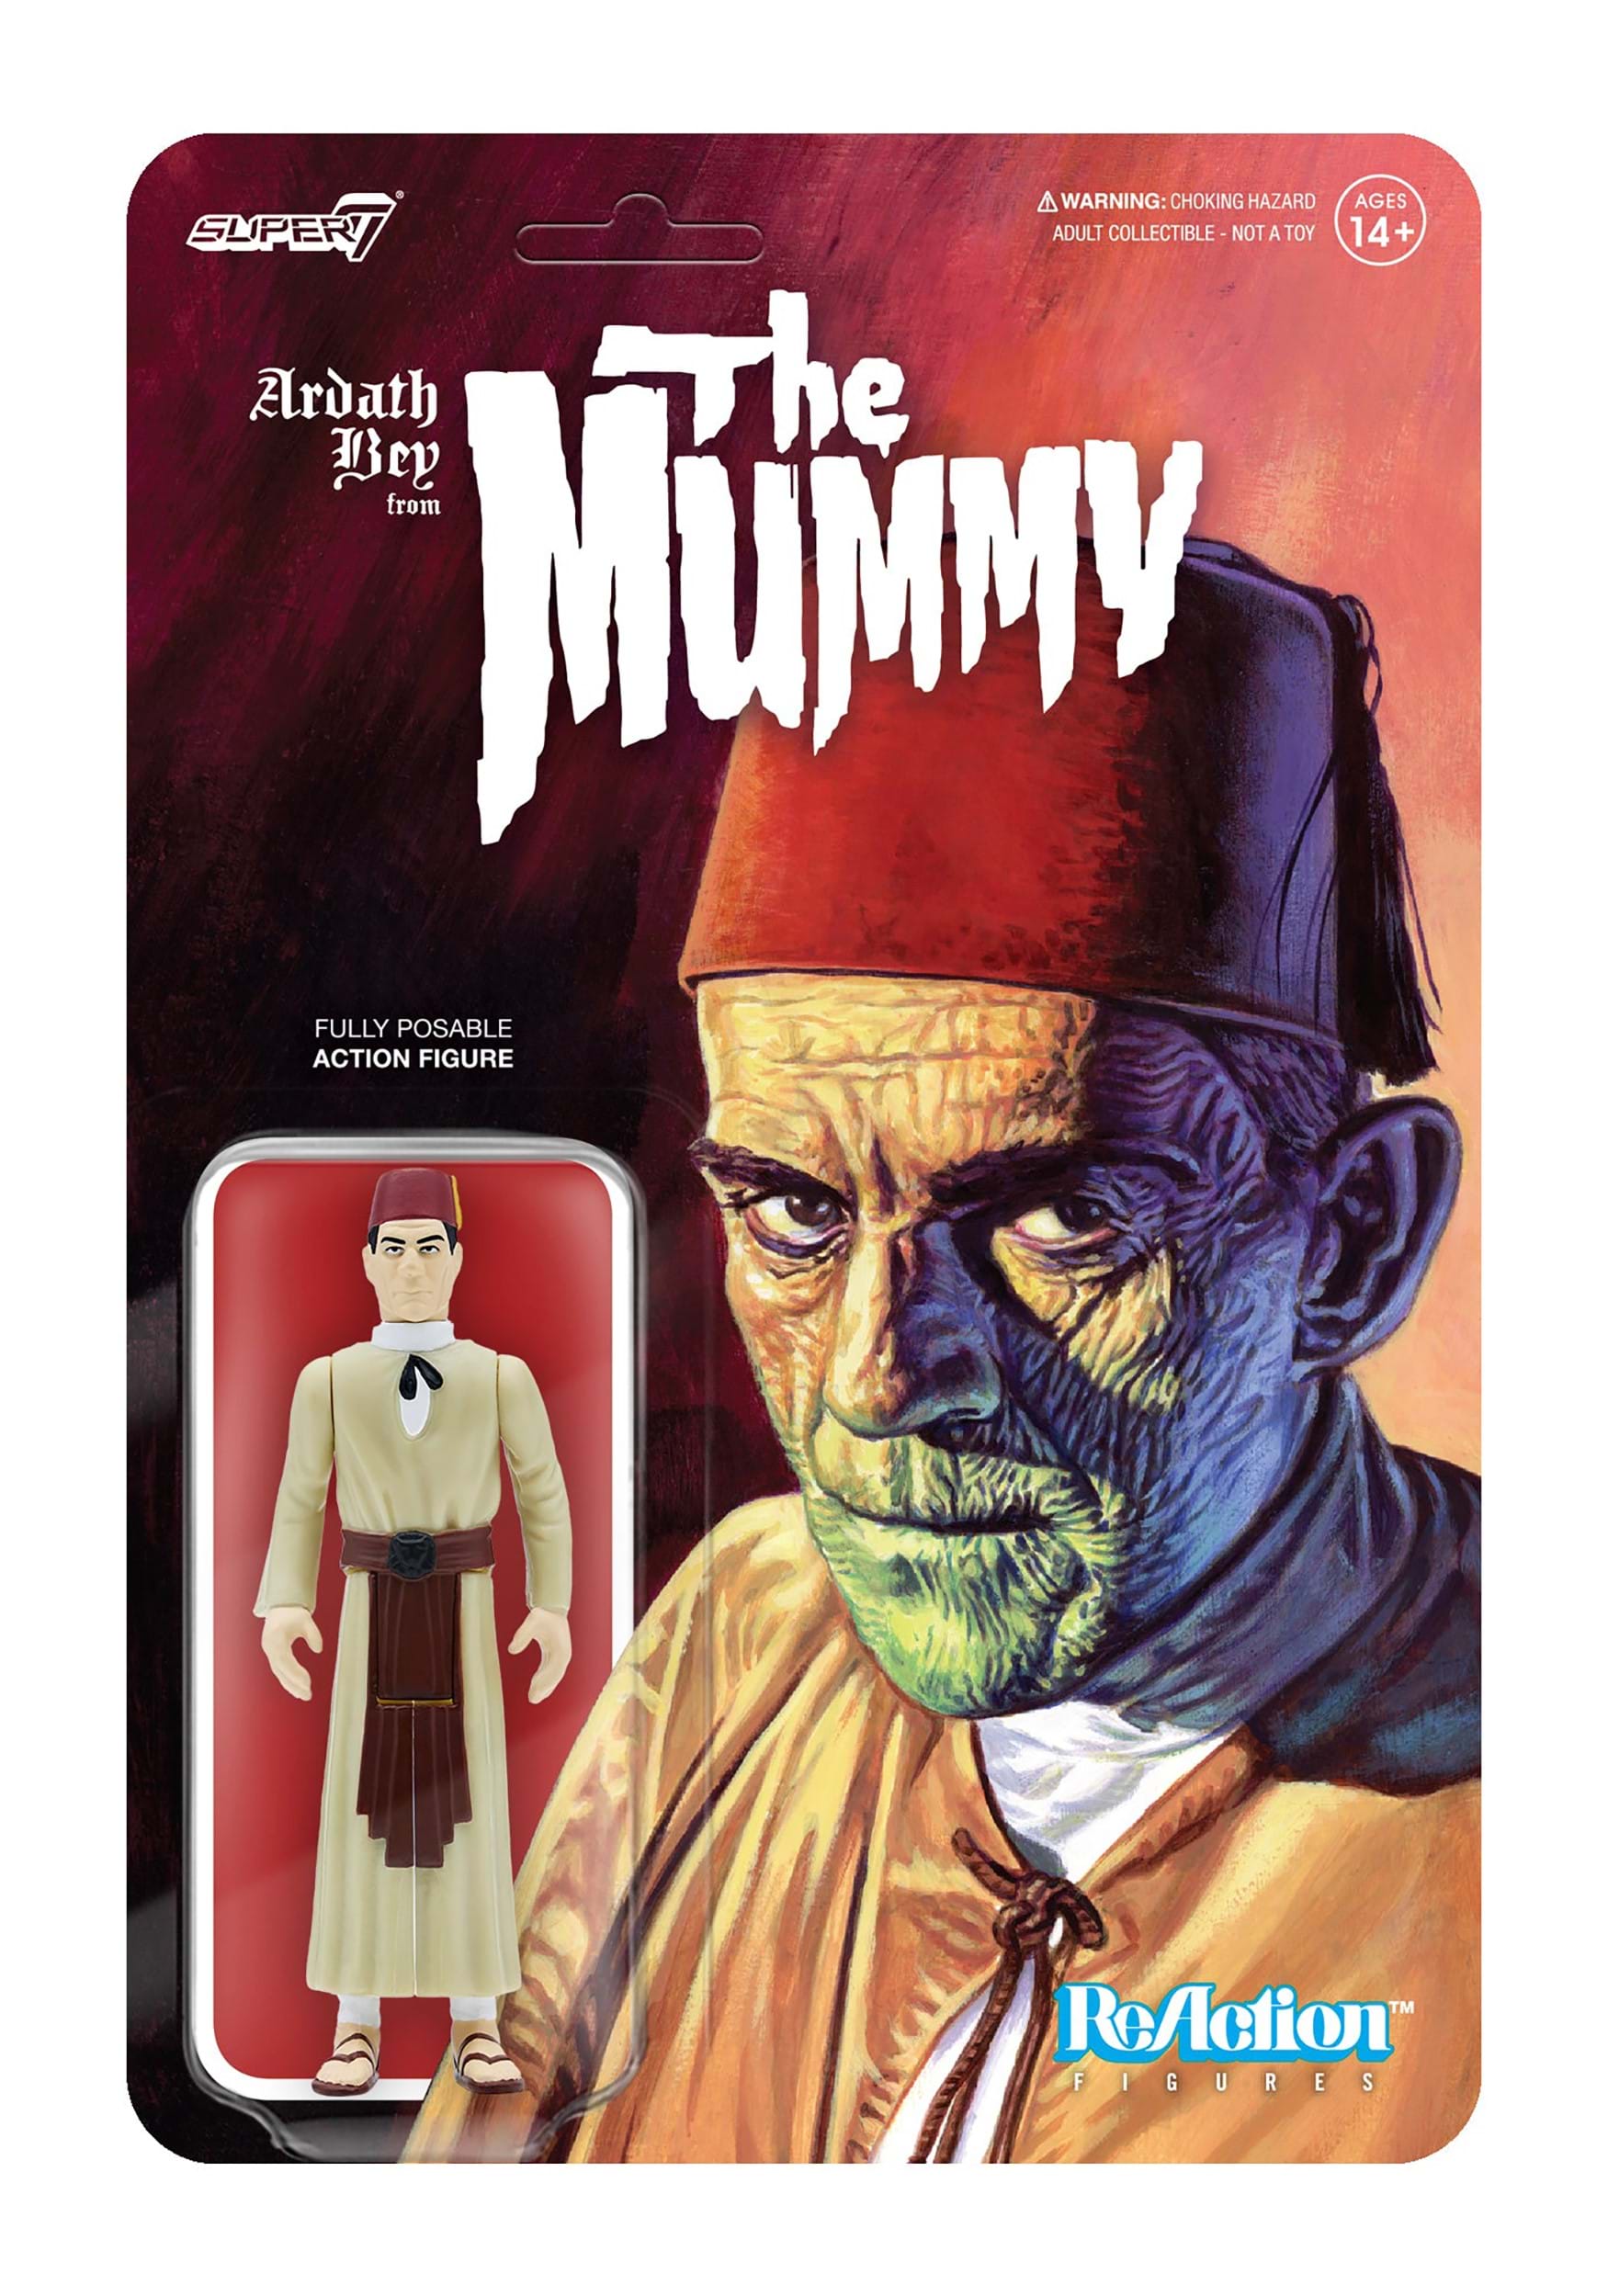 Universal Monsters Reaction The Mummy Ardath Bey Action Figure